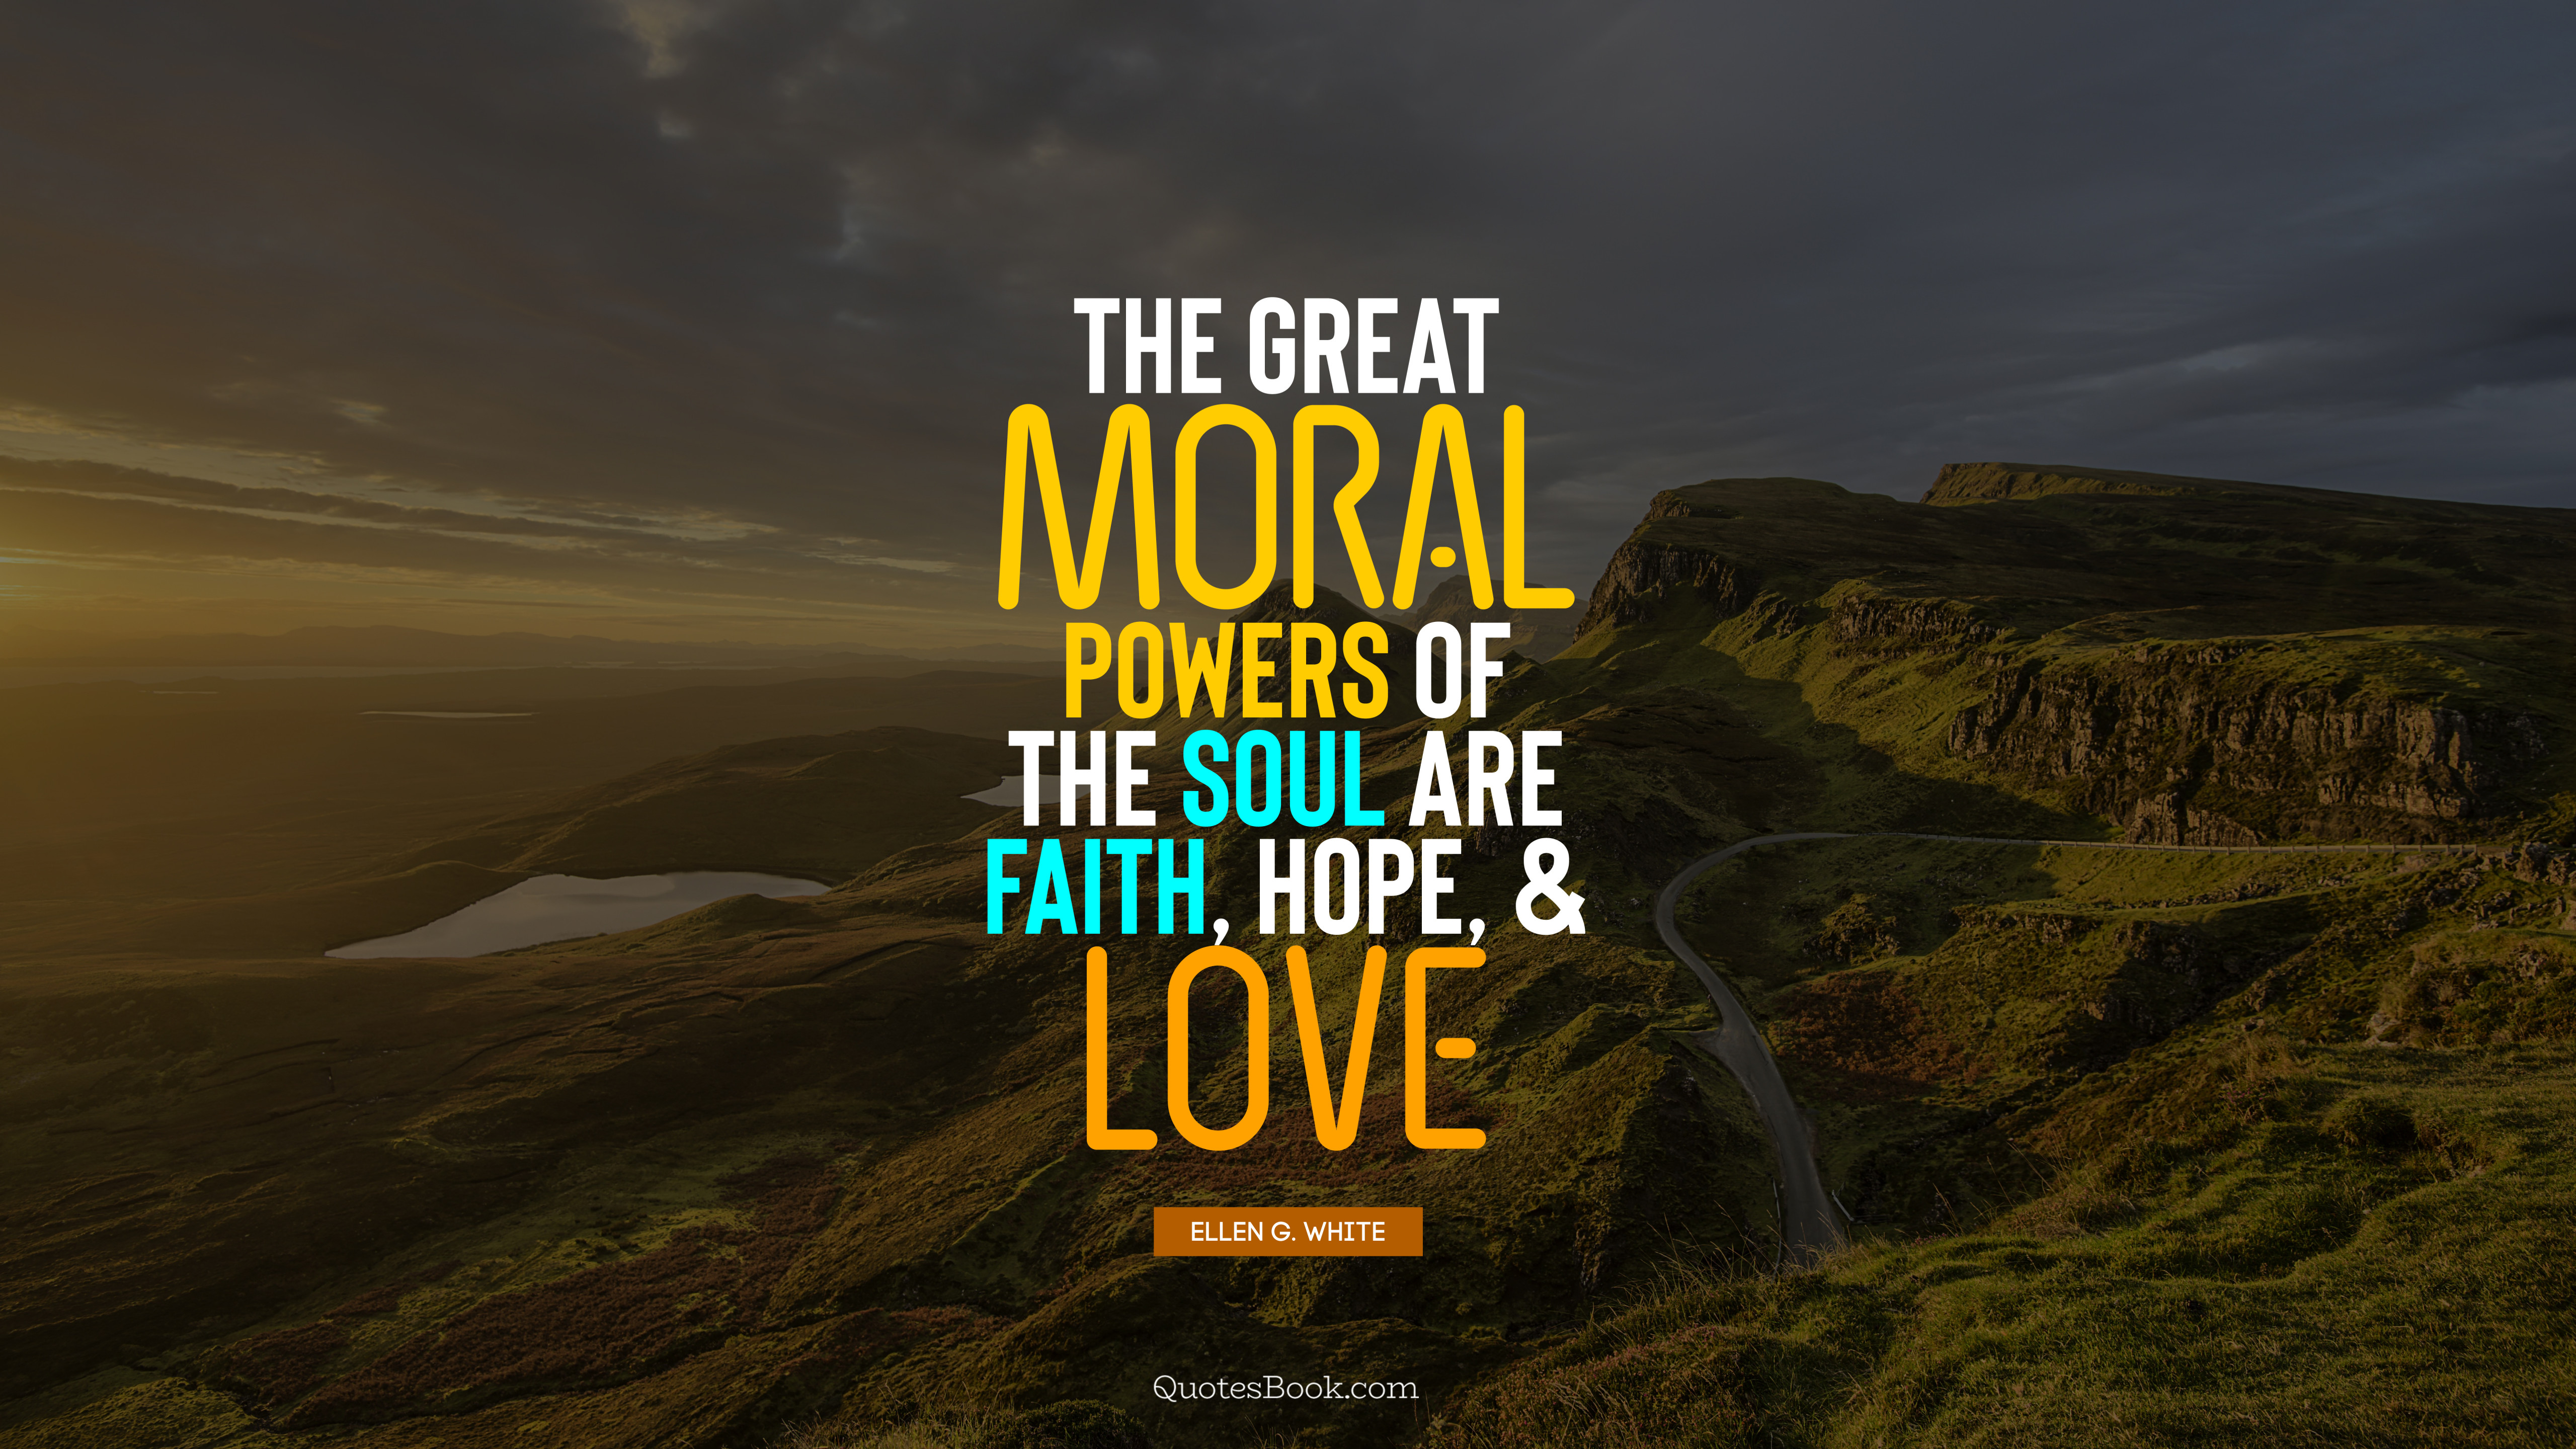 The great moral powers of the soul are faith, hope, and love. - Quote